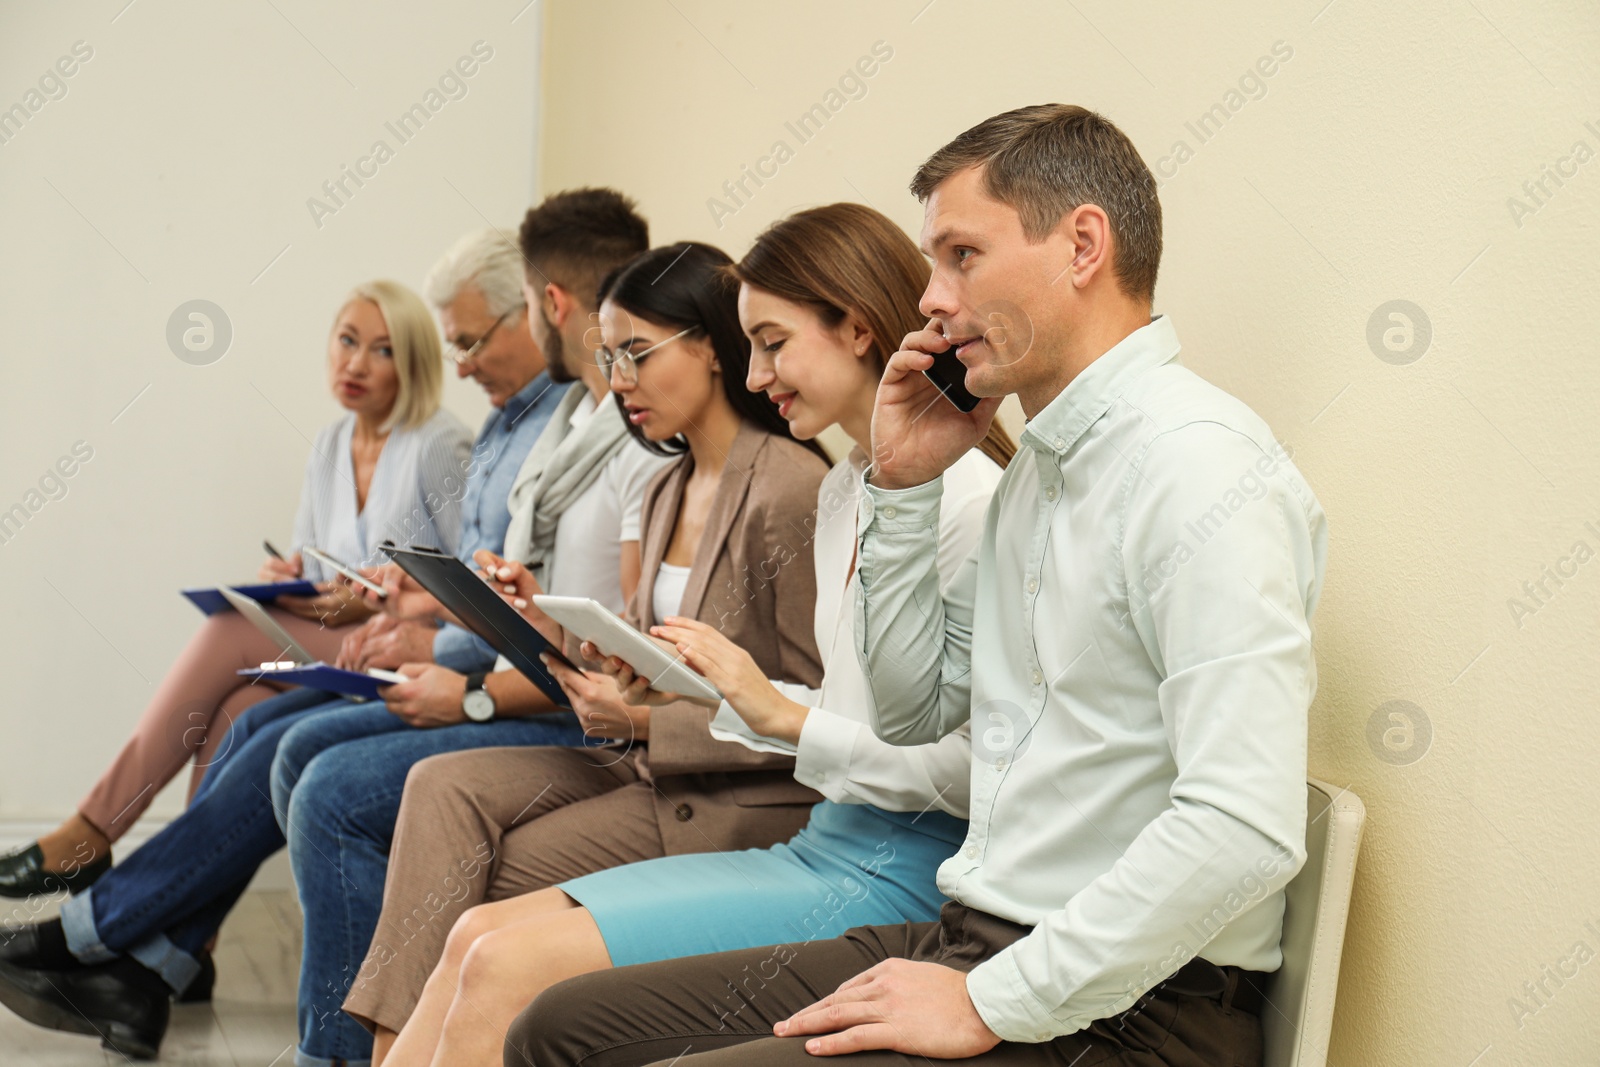 Photo of People waiting for job interview in office